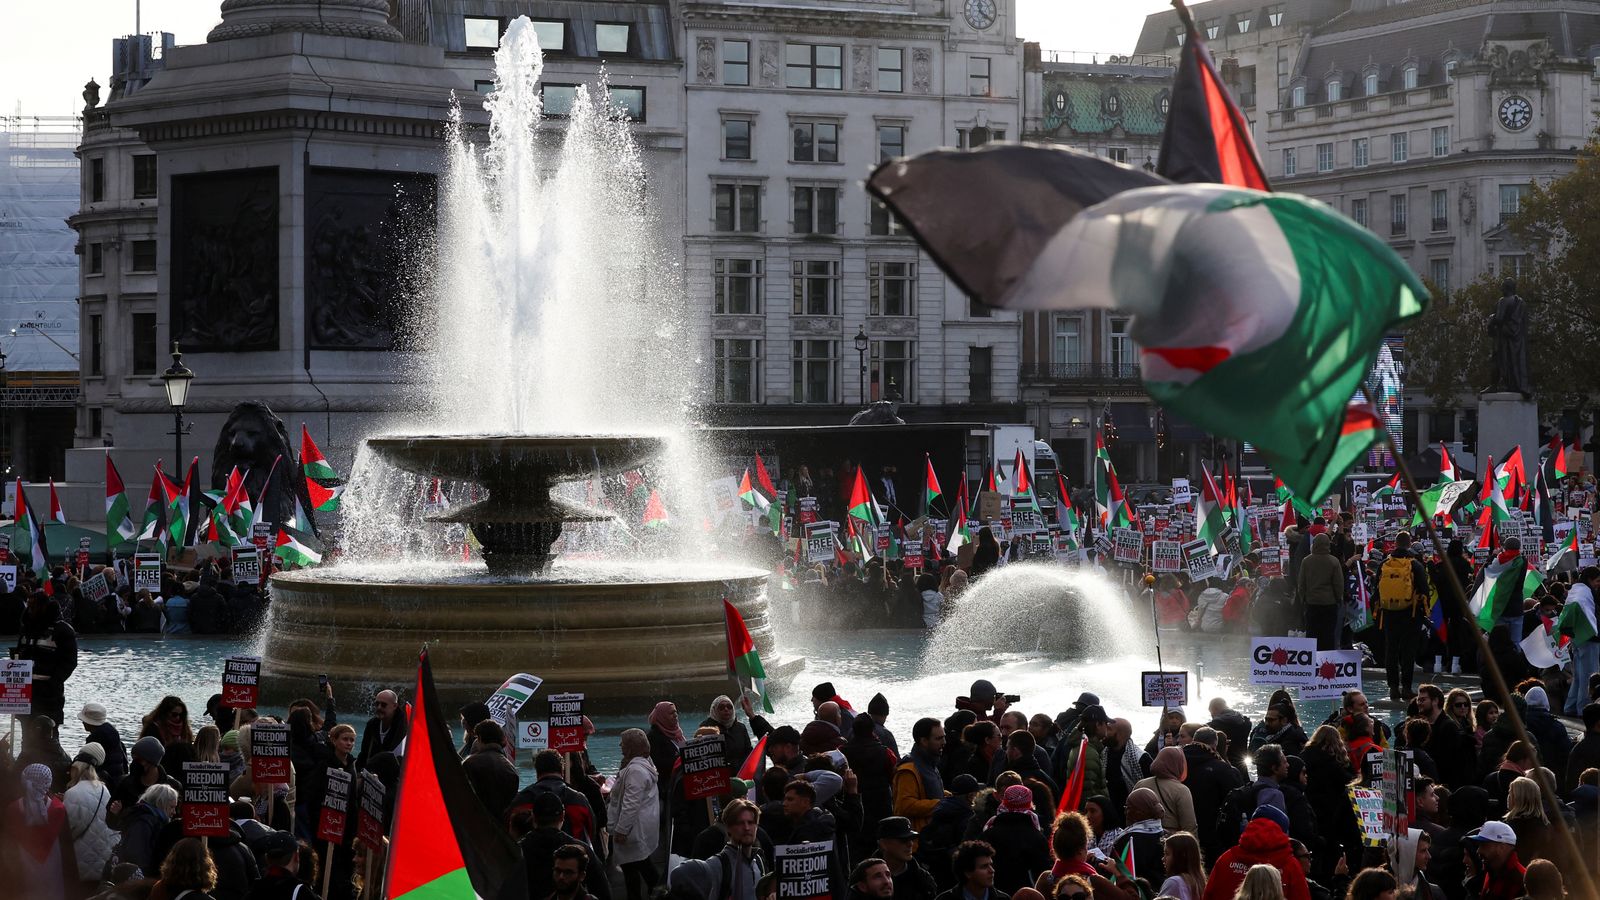 Pro-Palestinian protesters set off fireworks into crowd - four police officers injured